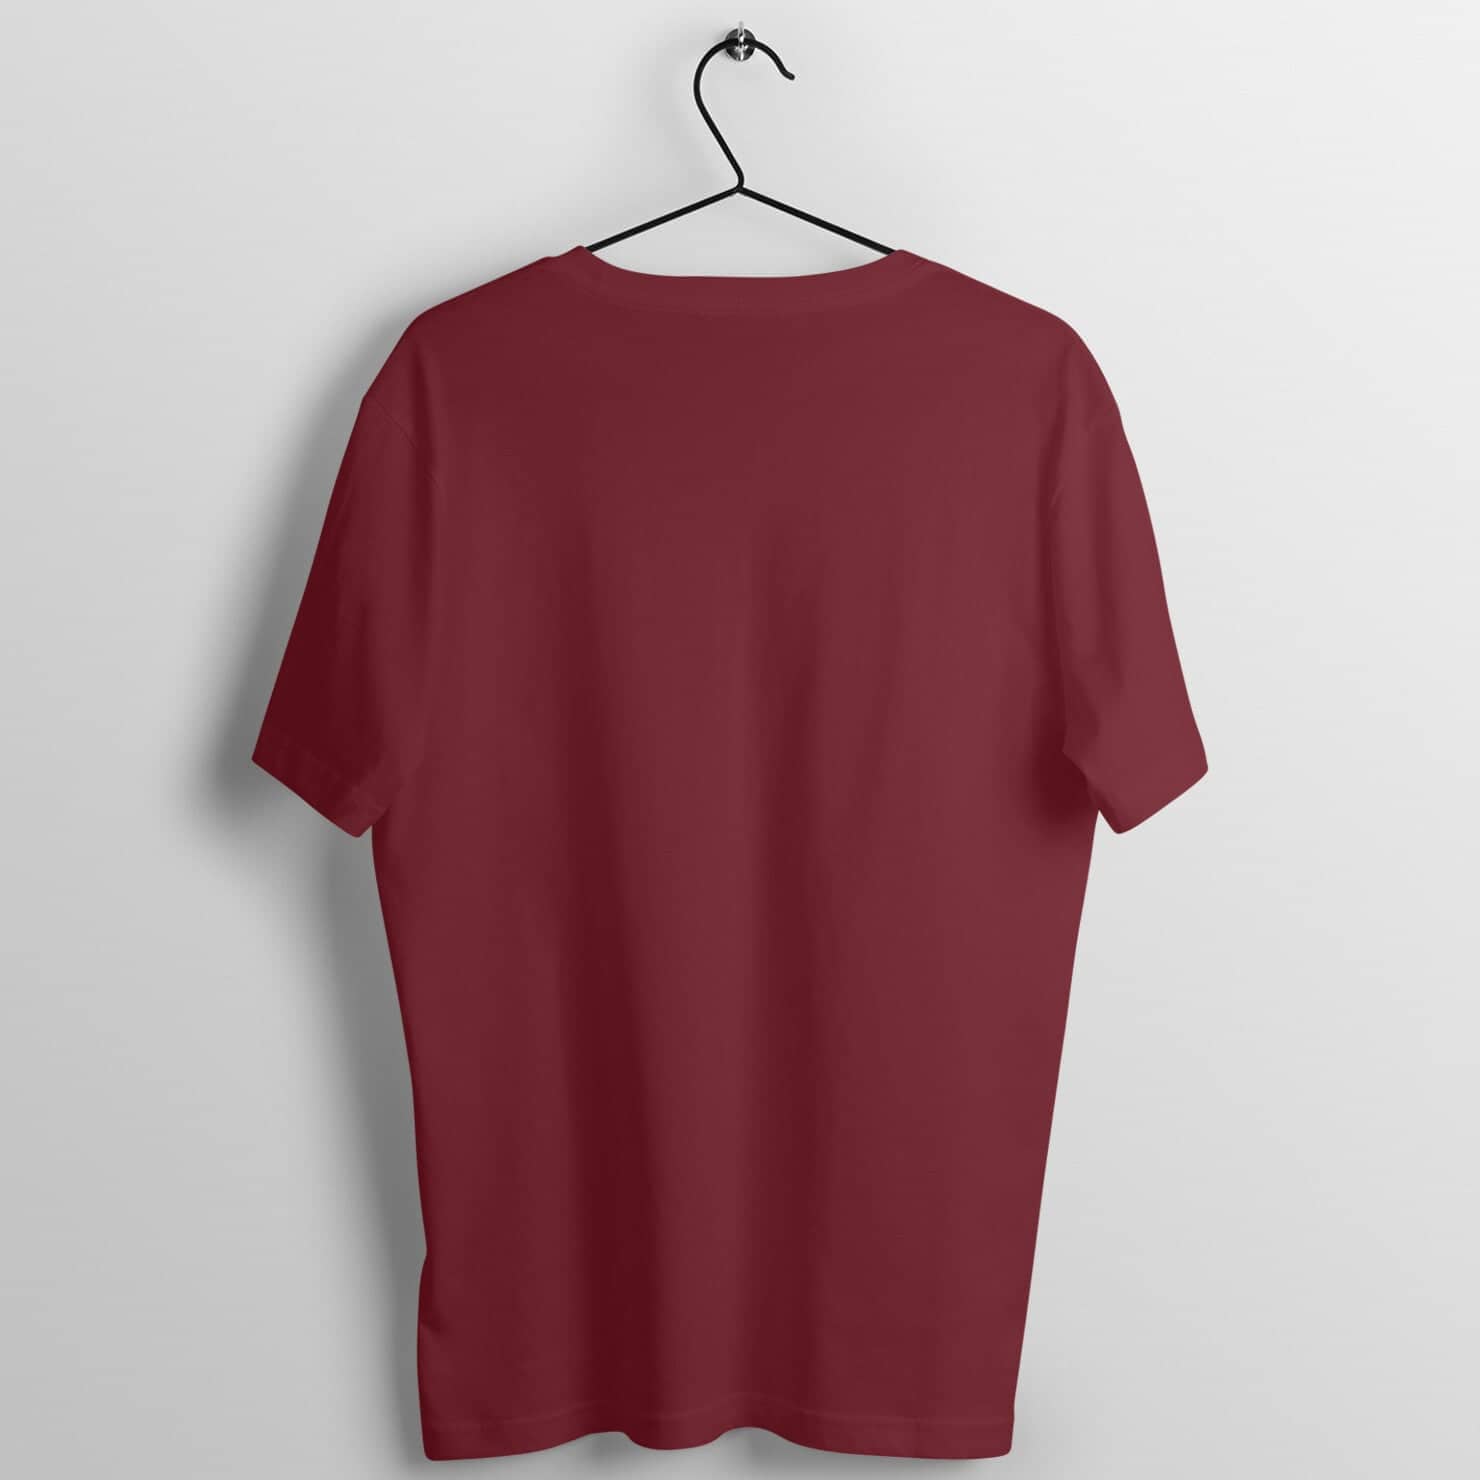 It's a Tea Shirt Funny Maroon T Shirt for Men and Women Shirts & Tops Printrove 